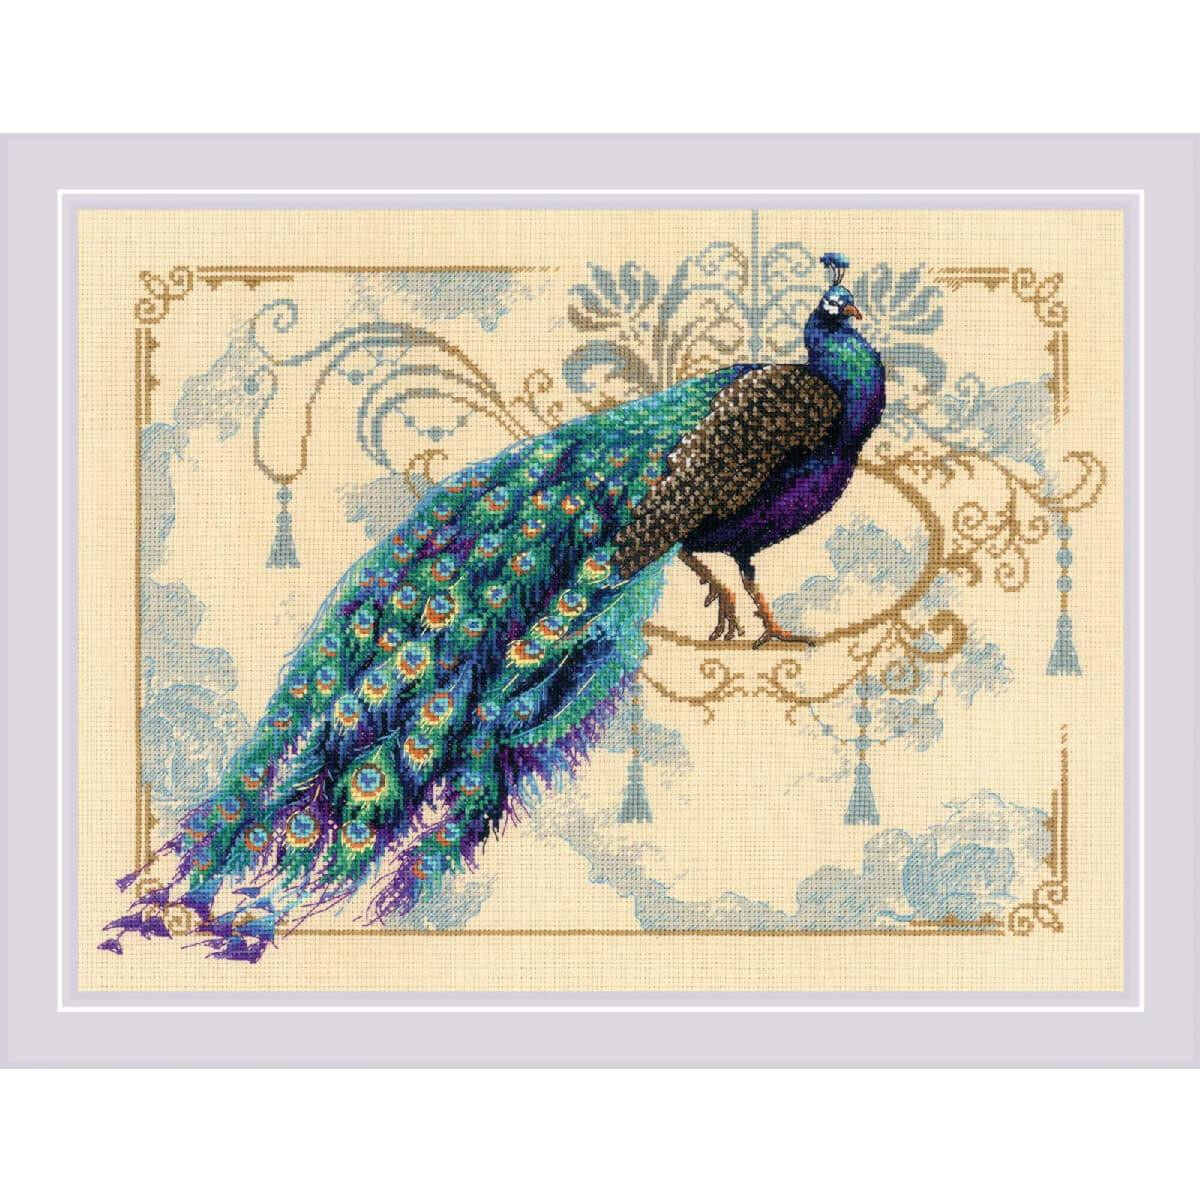 Riolis counted cross stitch kit "Eastern Fairy...